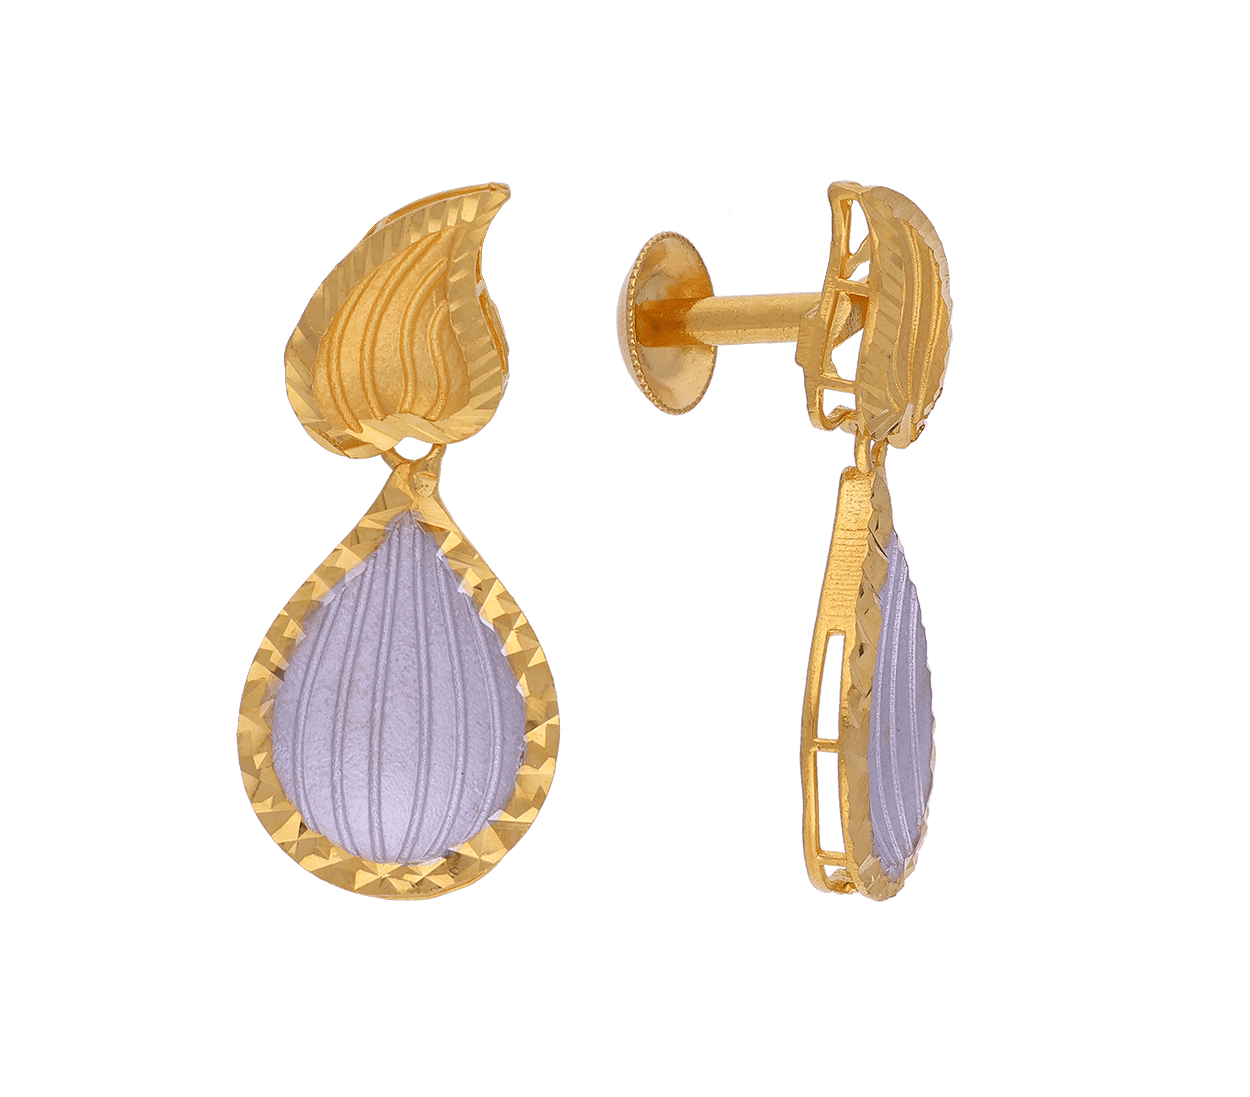 Light Weight Gold Earrings Designs With Price | #BeautifulGoldEarrings  #earringsdesigns #trishagoldart | Light Weight Gold Earrings Designs With  Price | #BeautifulGoldEarrings#trishagoldart #earringsdesigns | By Trisha  gold art | Facebook